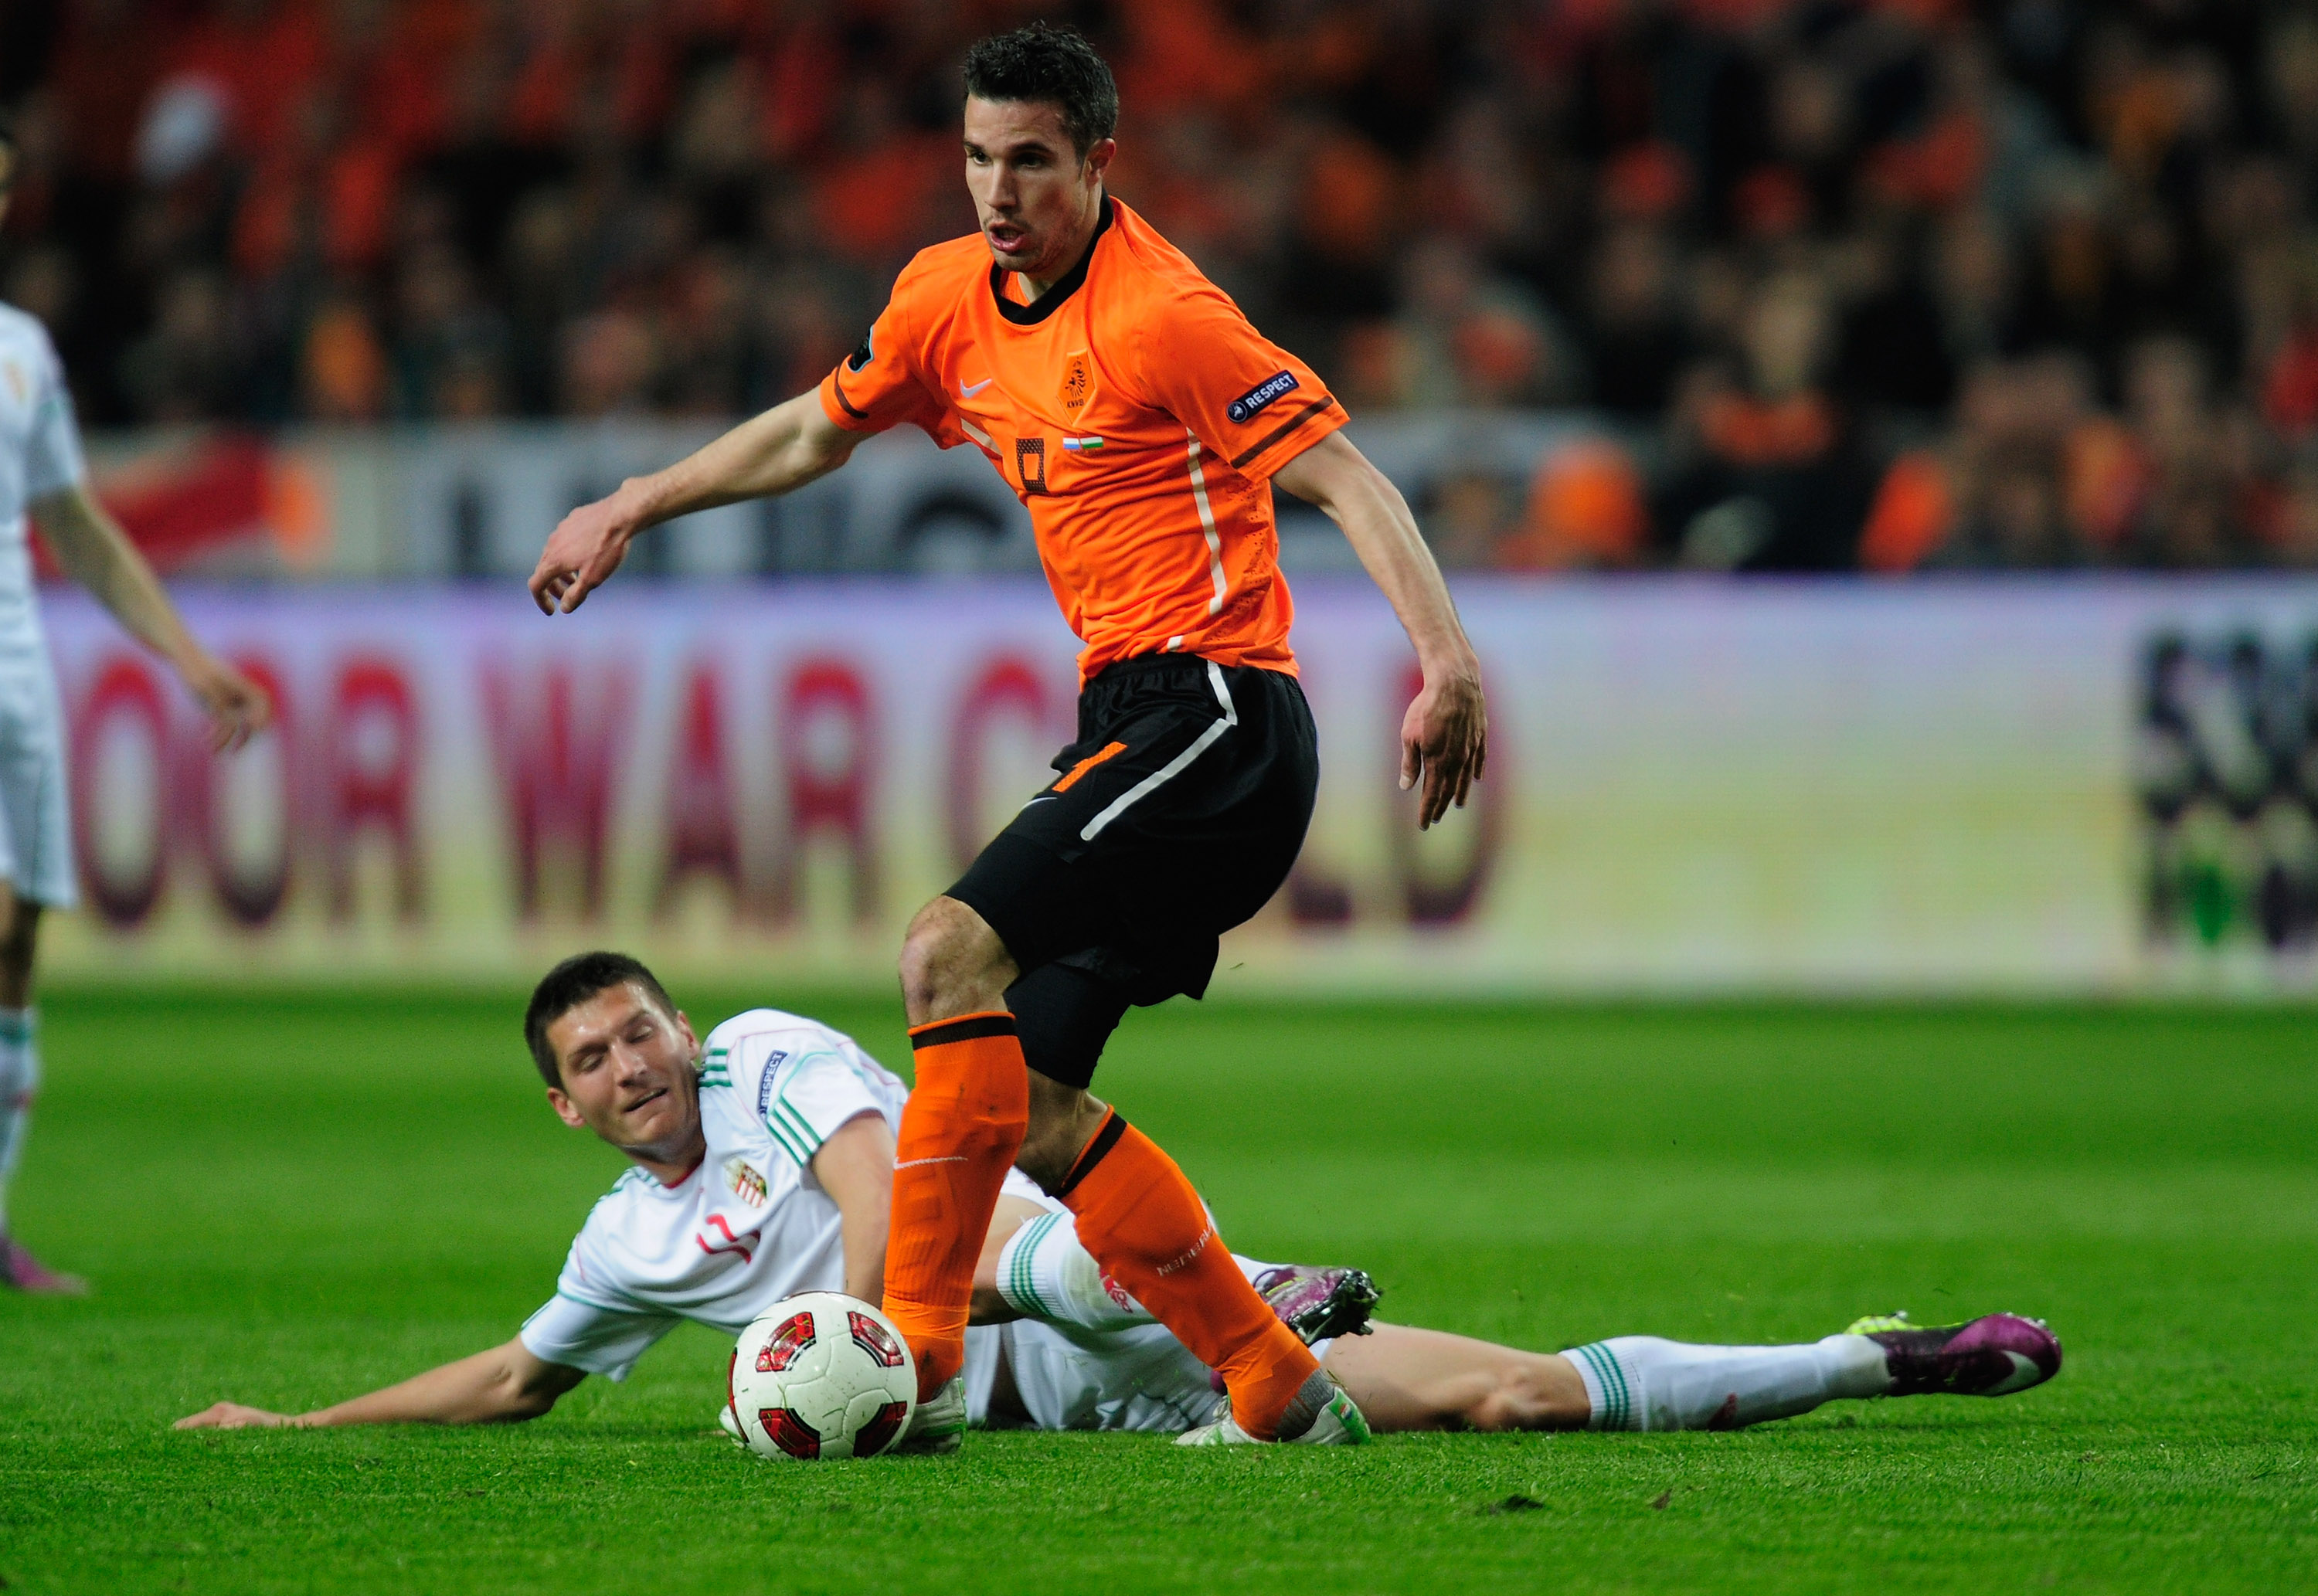 AMSTERDAM, NETHERLANDS - MARCH 29:  Robin Van Persie of the Netherlands battles with Adam Pinter of Hungary during the Group E, EURO 2012 Qualifier between Netherlands and Hungary at the Amsterdam Arena on March 29, 2011 in Amsterdam, Netherlands.  (Photo